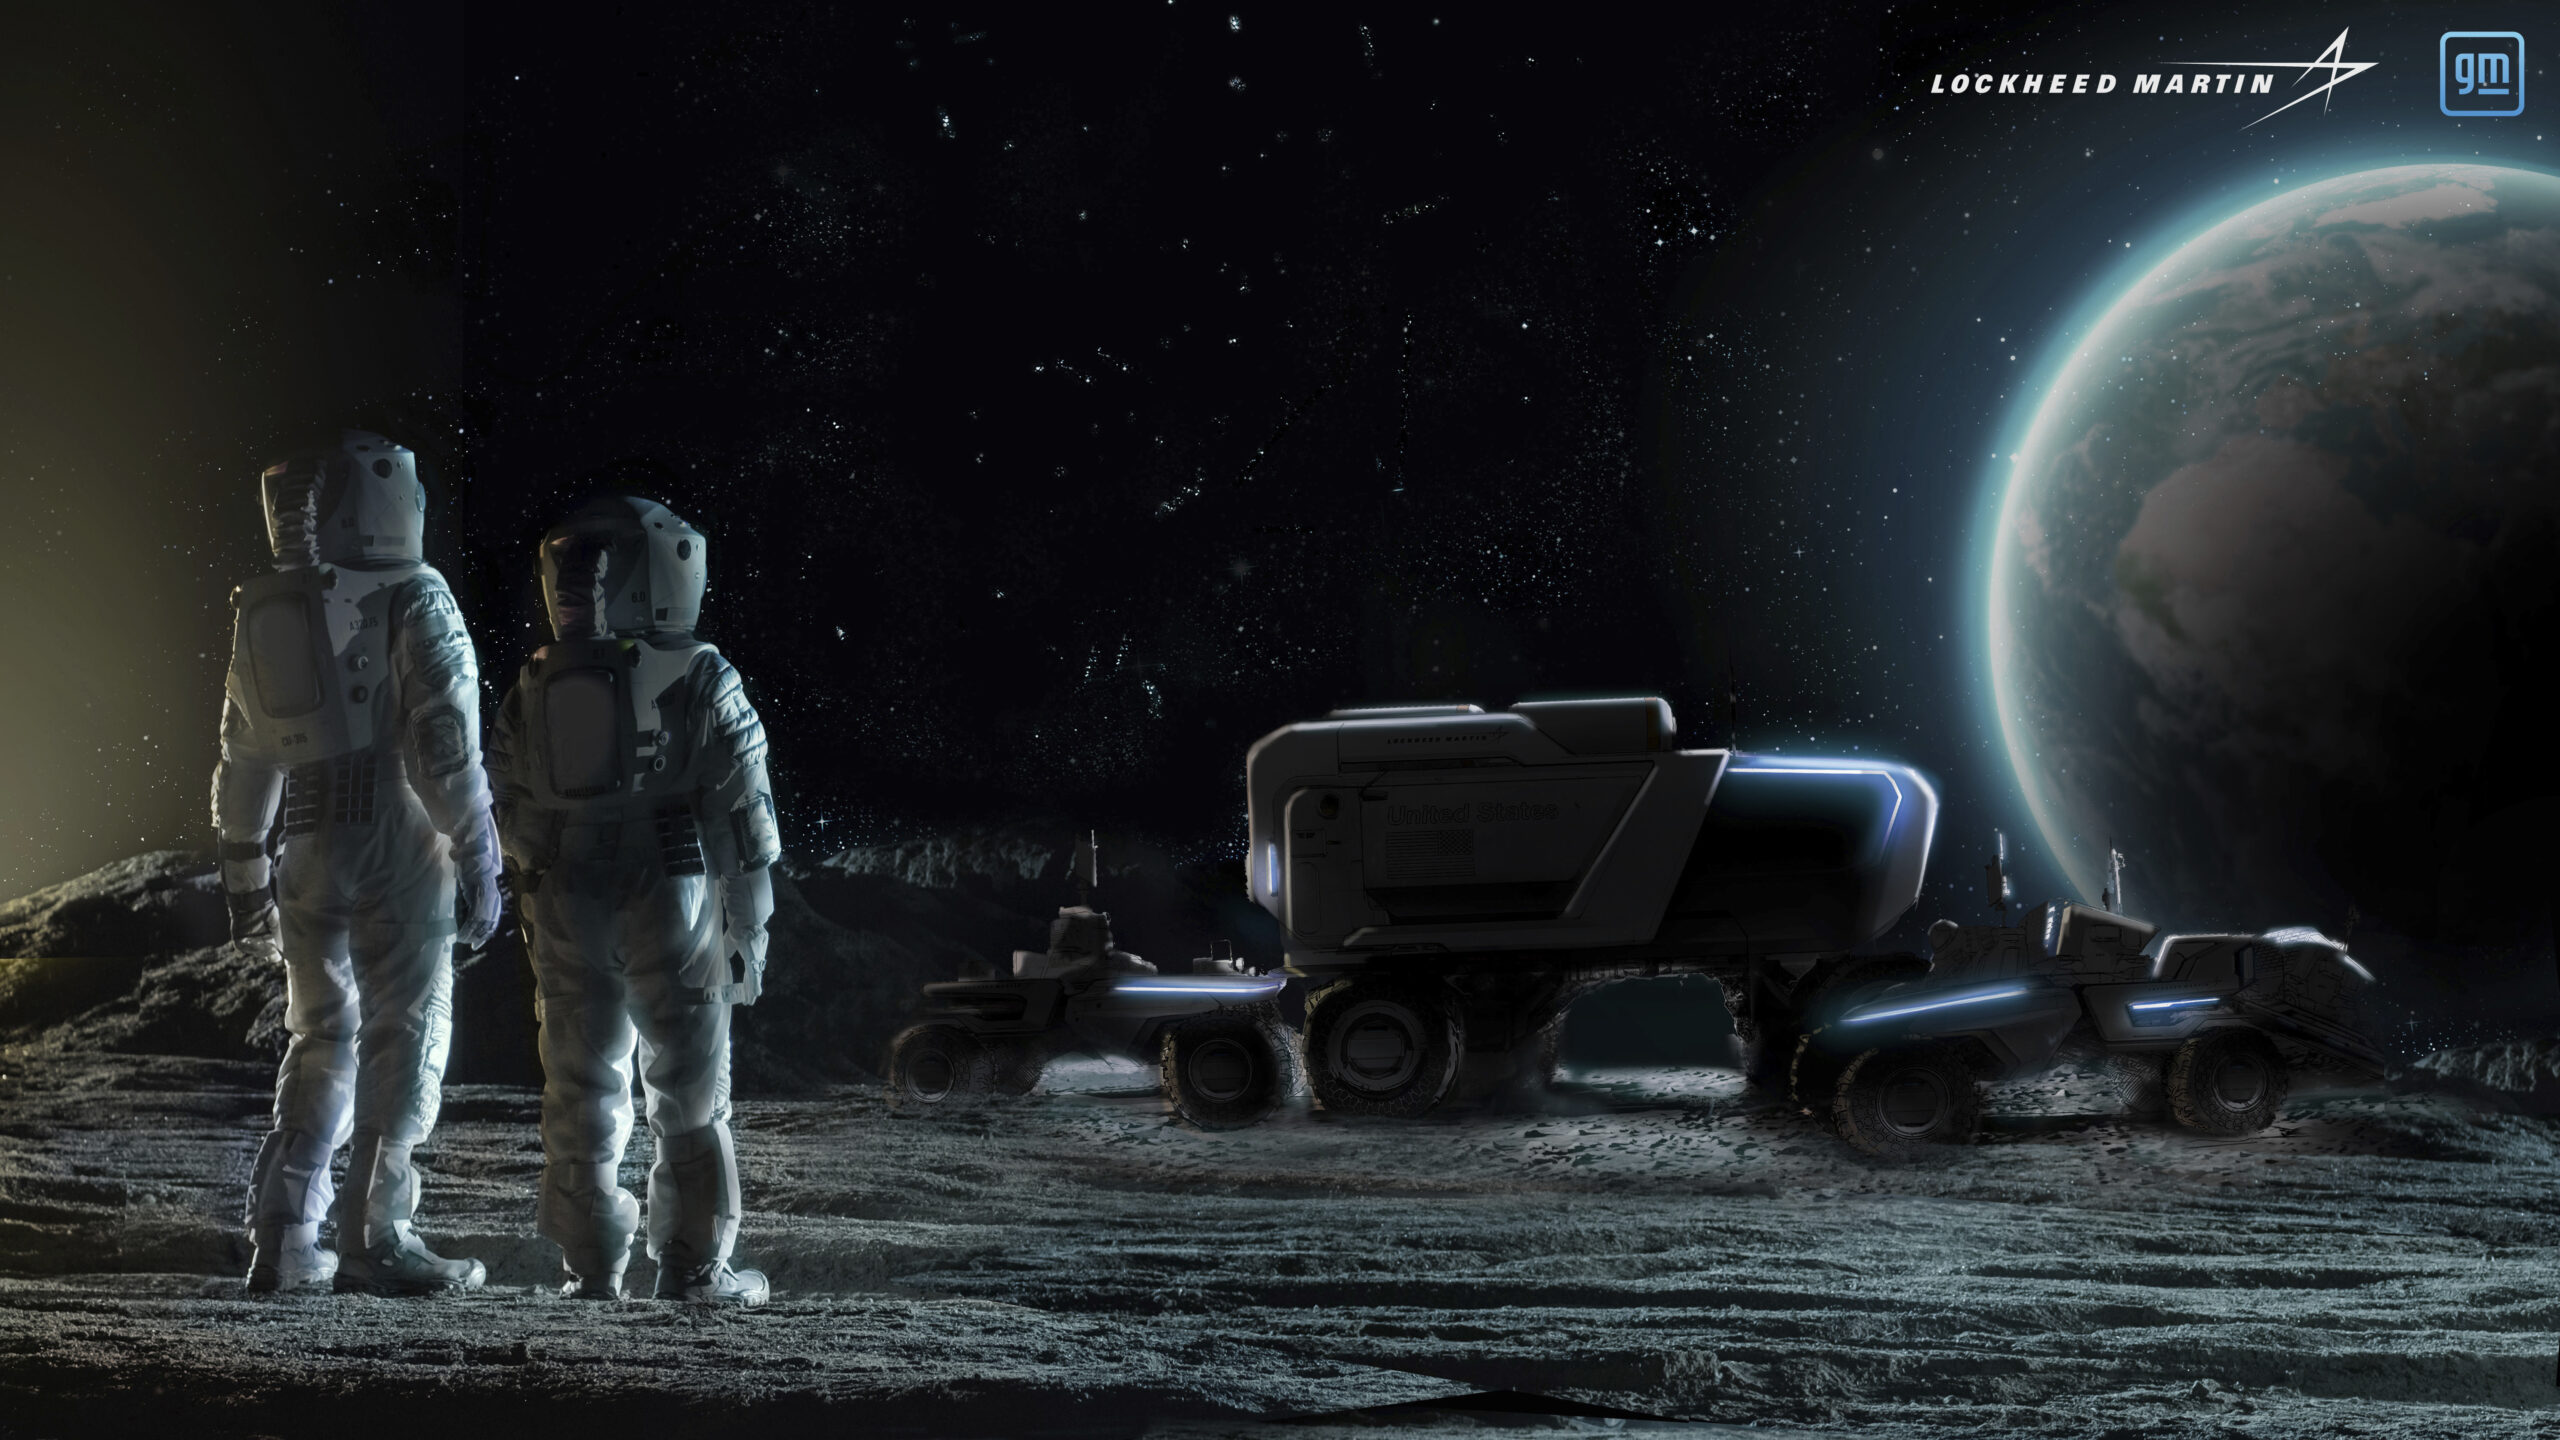 This illustration provided by General Motors and Lockheed Martin in May 2021 depicts astronauts and concepts of lunar rovers on the surface of the moon. On Wednesday, May 26, 2021, Lockheed and GM announced that they would combine their technological and manufacturing expertise to build the electric vehicles for NASA’s Artemis program, named after the twin sister of Apollo in Greek mythology. (Lockheed Martin, GM via AP)